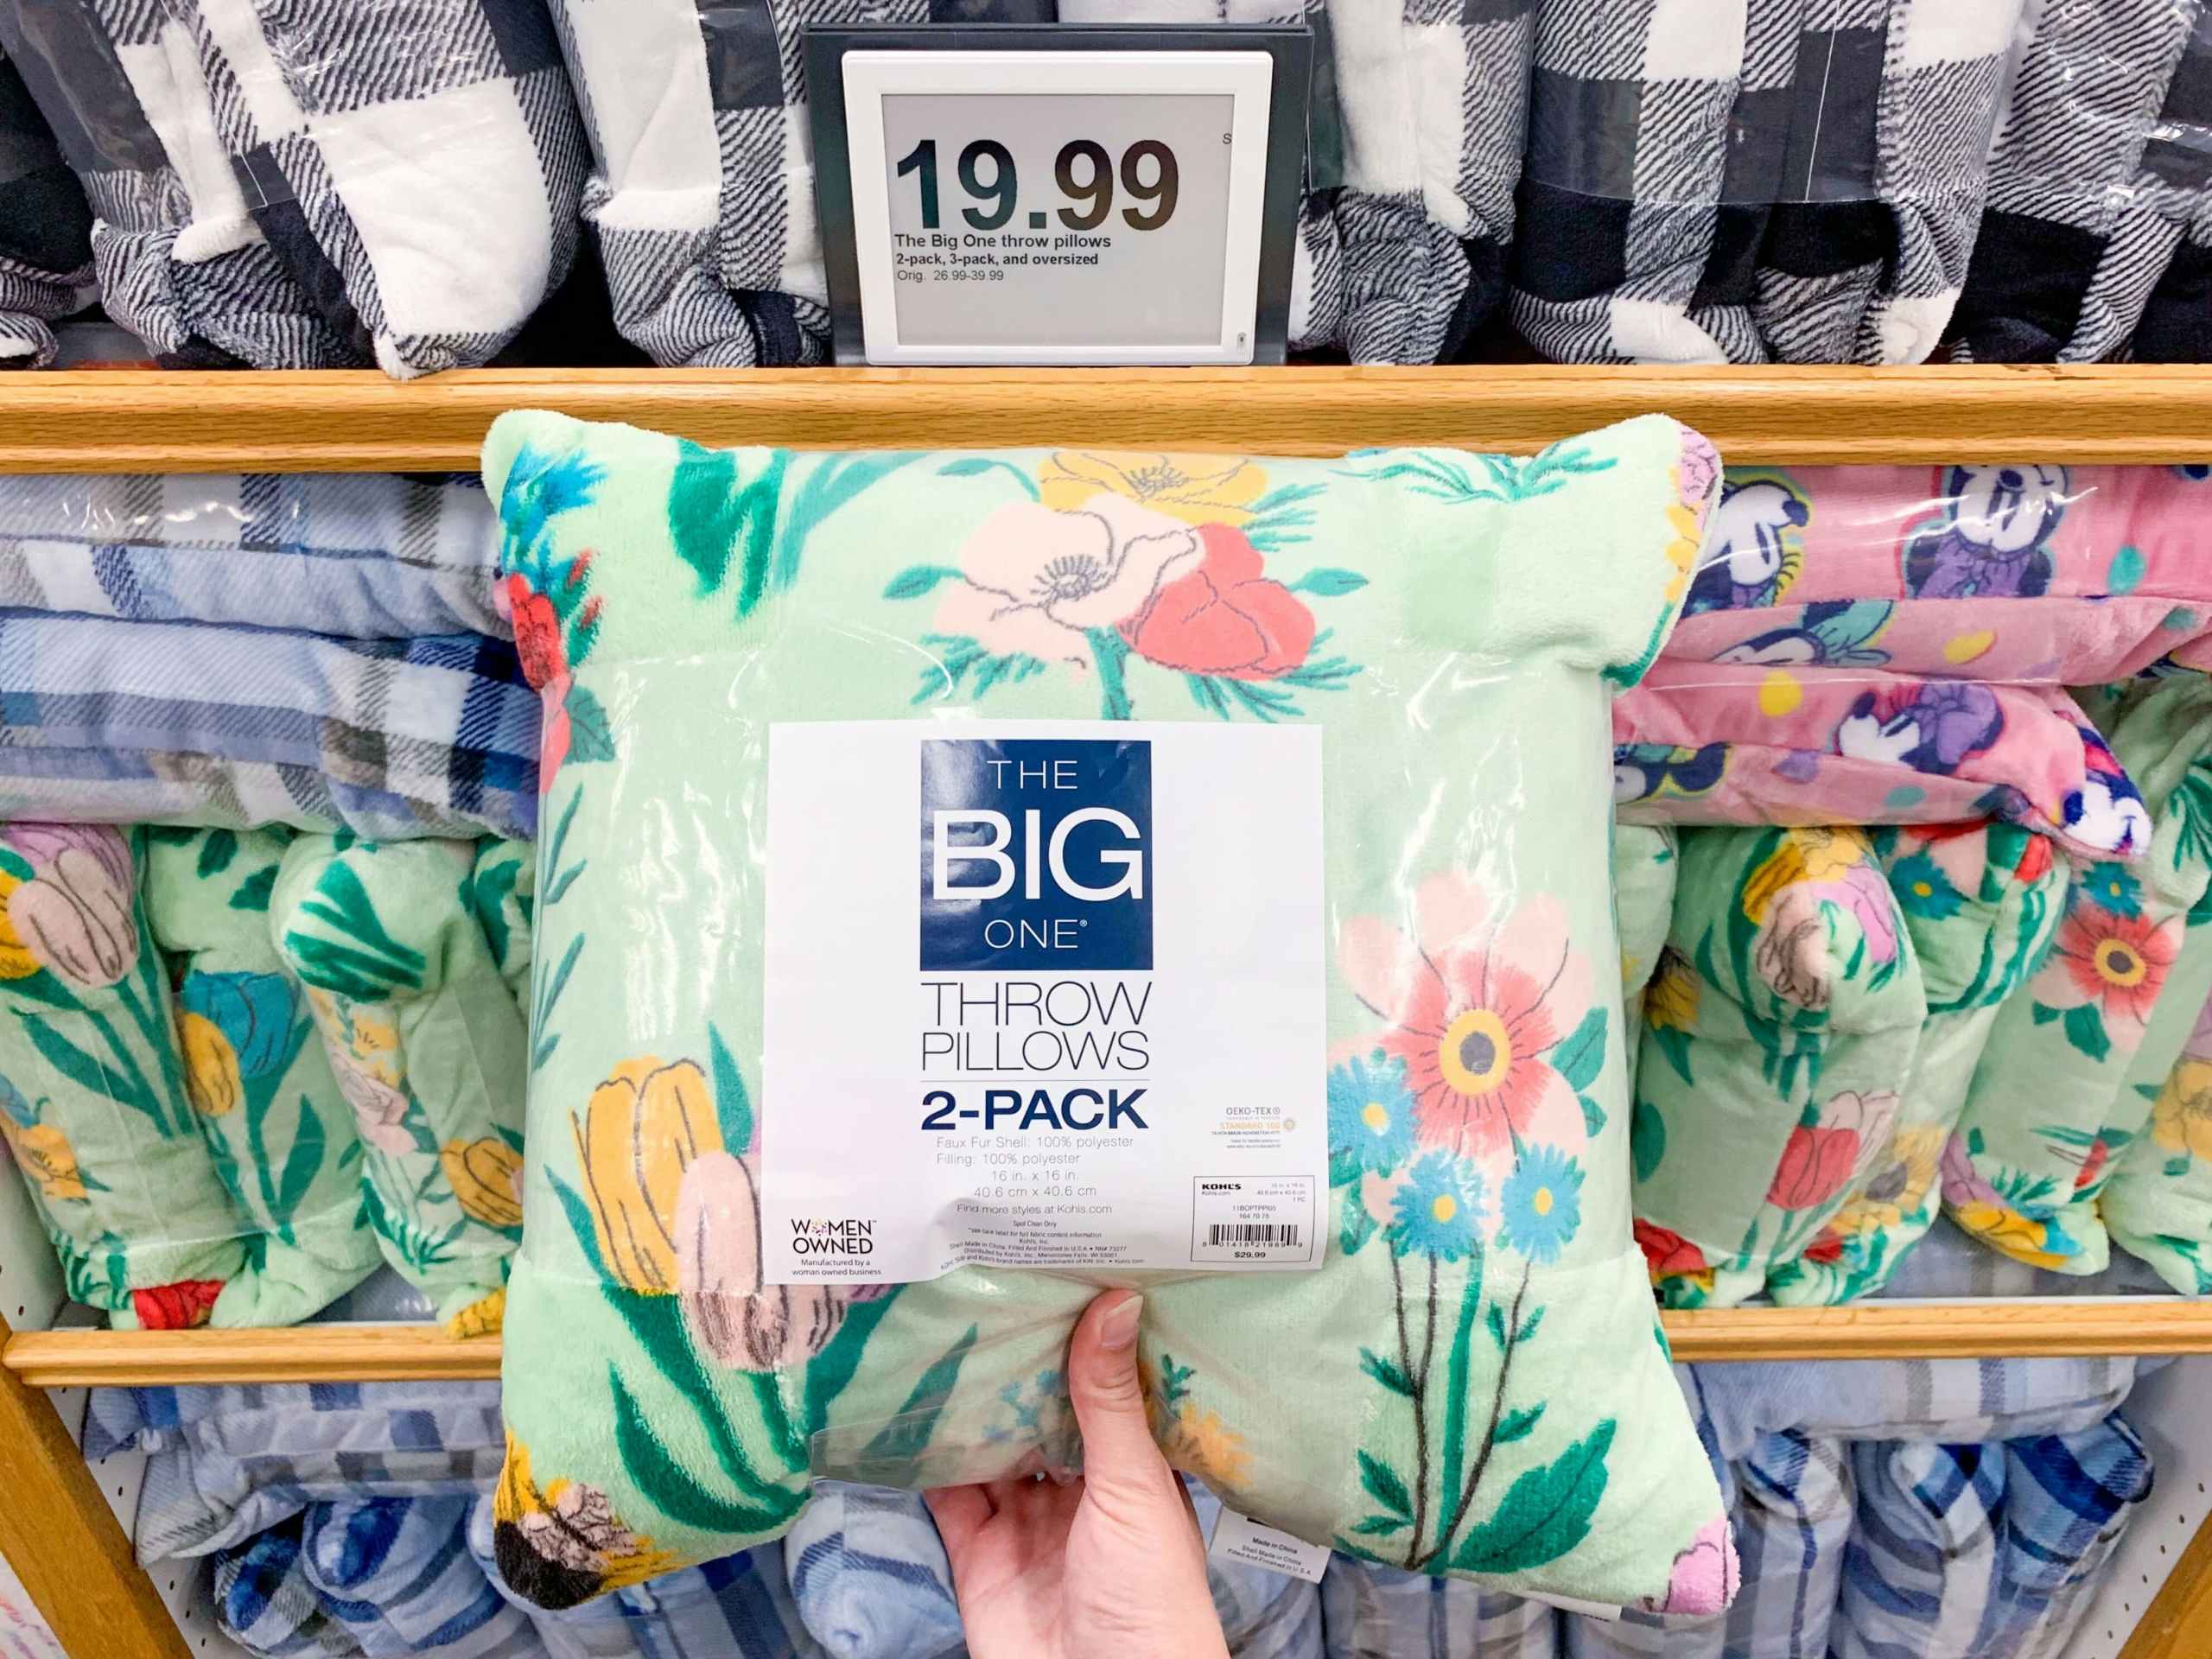 the big one 2-pack pillows kohls